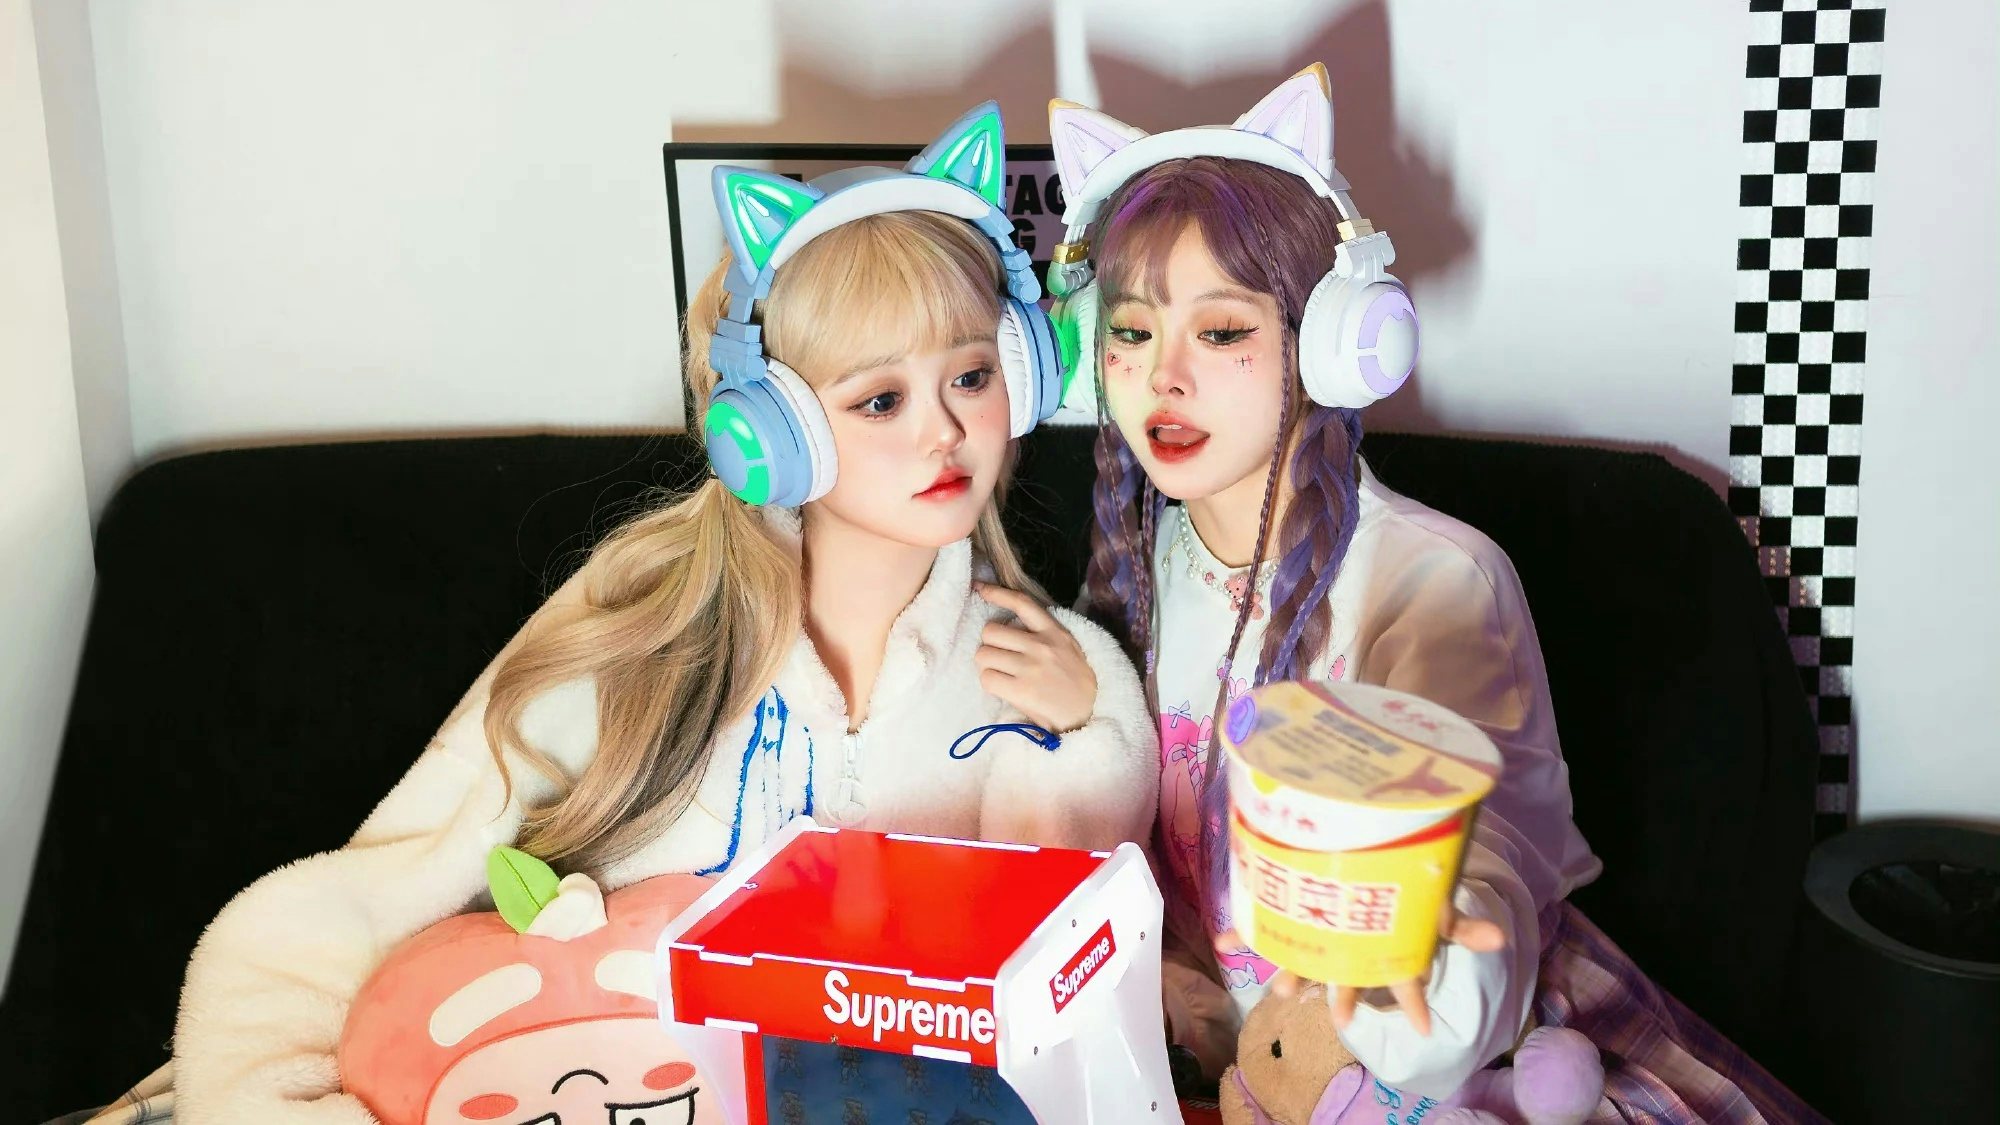 Trending subcultures and aesthetics like China's 'Gamer Girls' are a potential foot in the door for brands to make their mark. Photo: Yowu